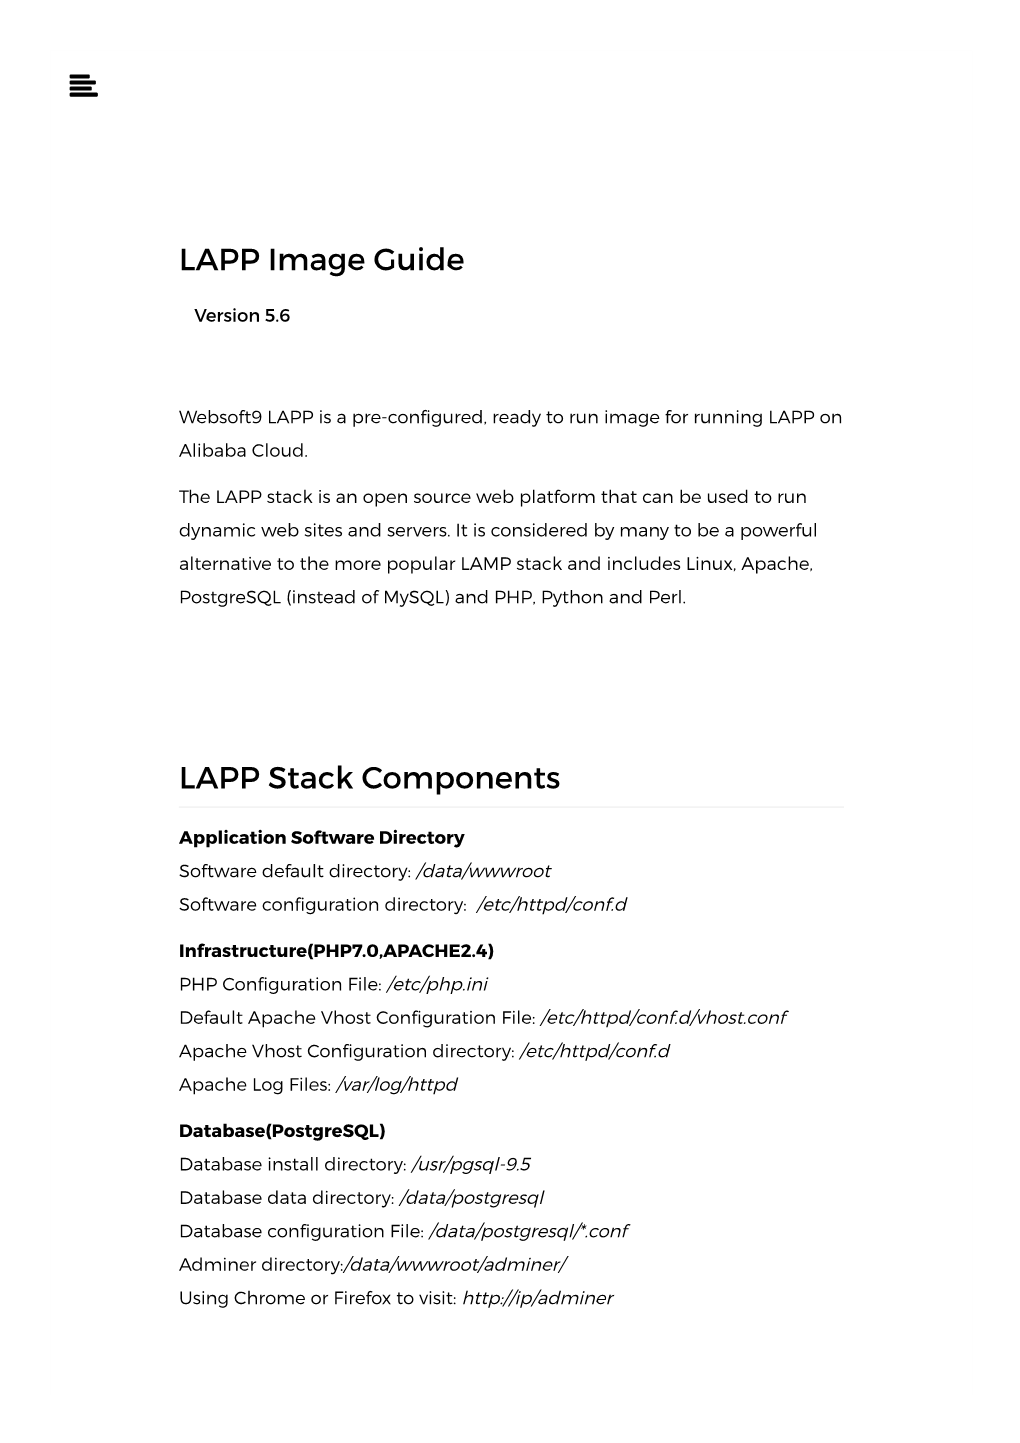 LAPP Image Guide LAPP Stack Components